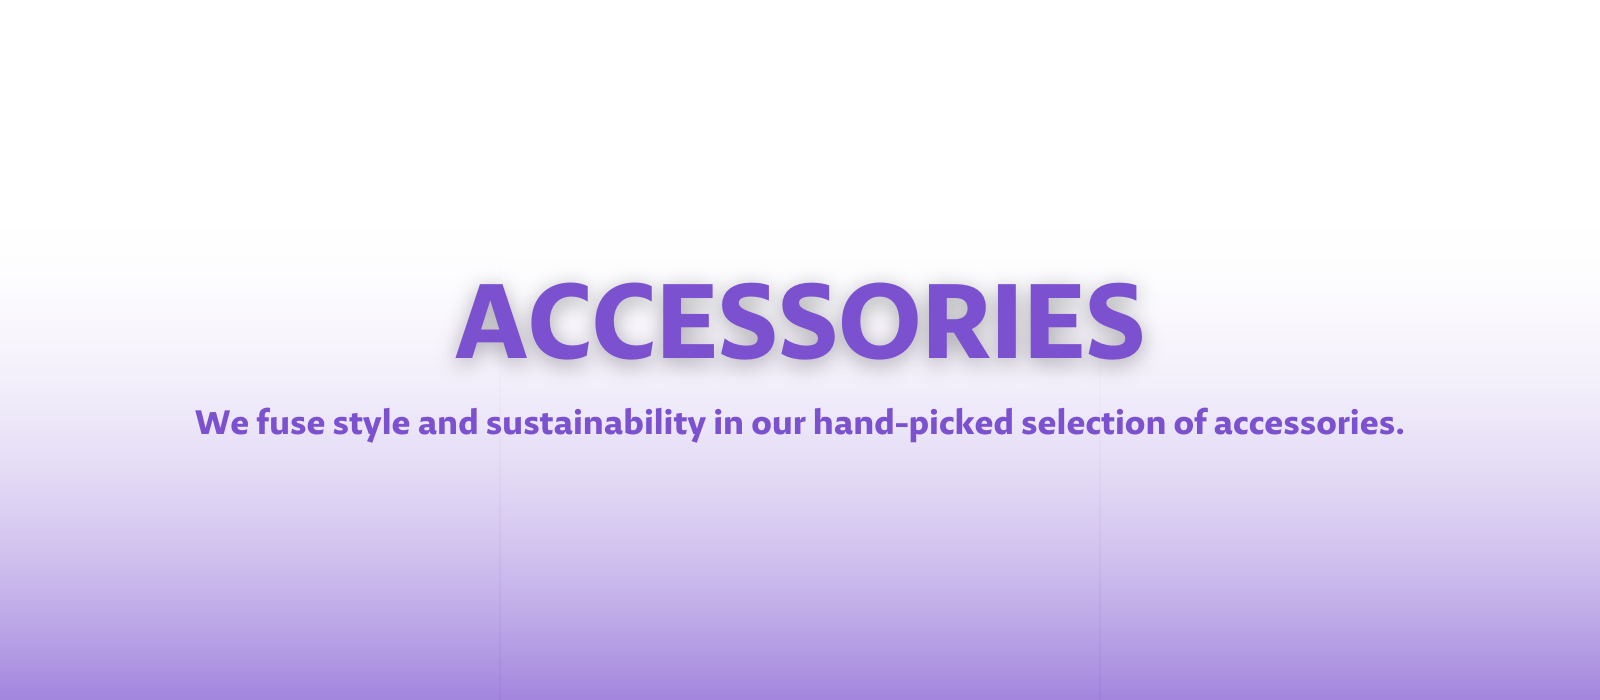 Kaiya Cosmetics™ Accessories. We fuse style and sustainability in our hand-picked selection of accessories.